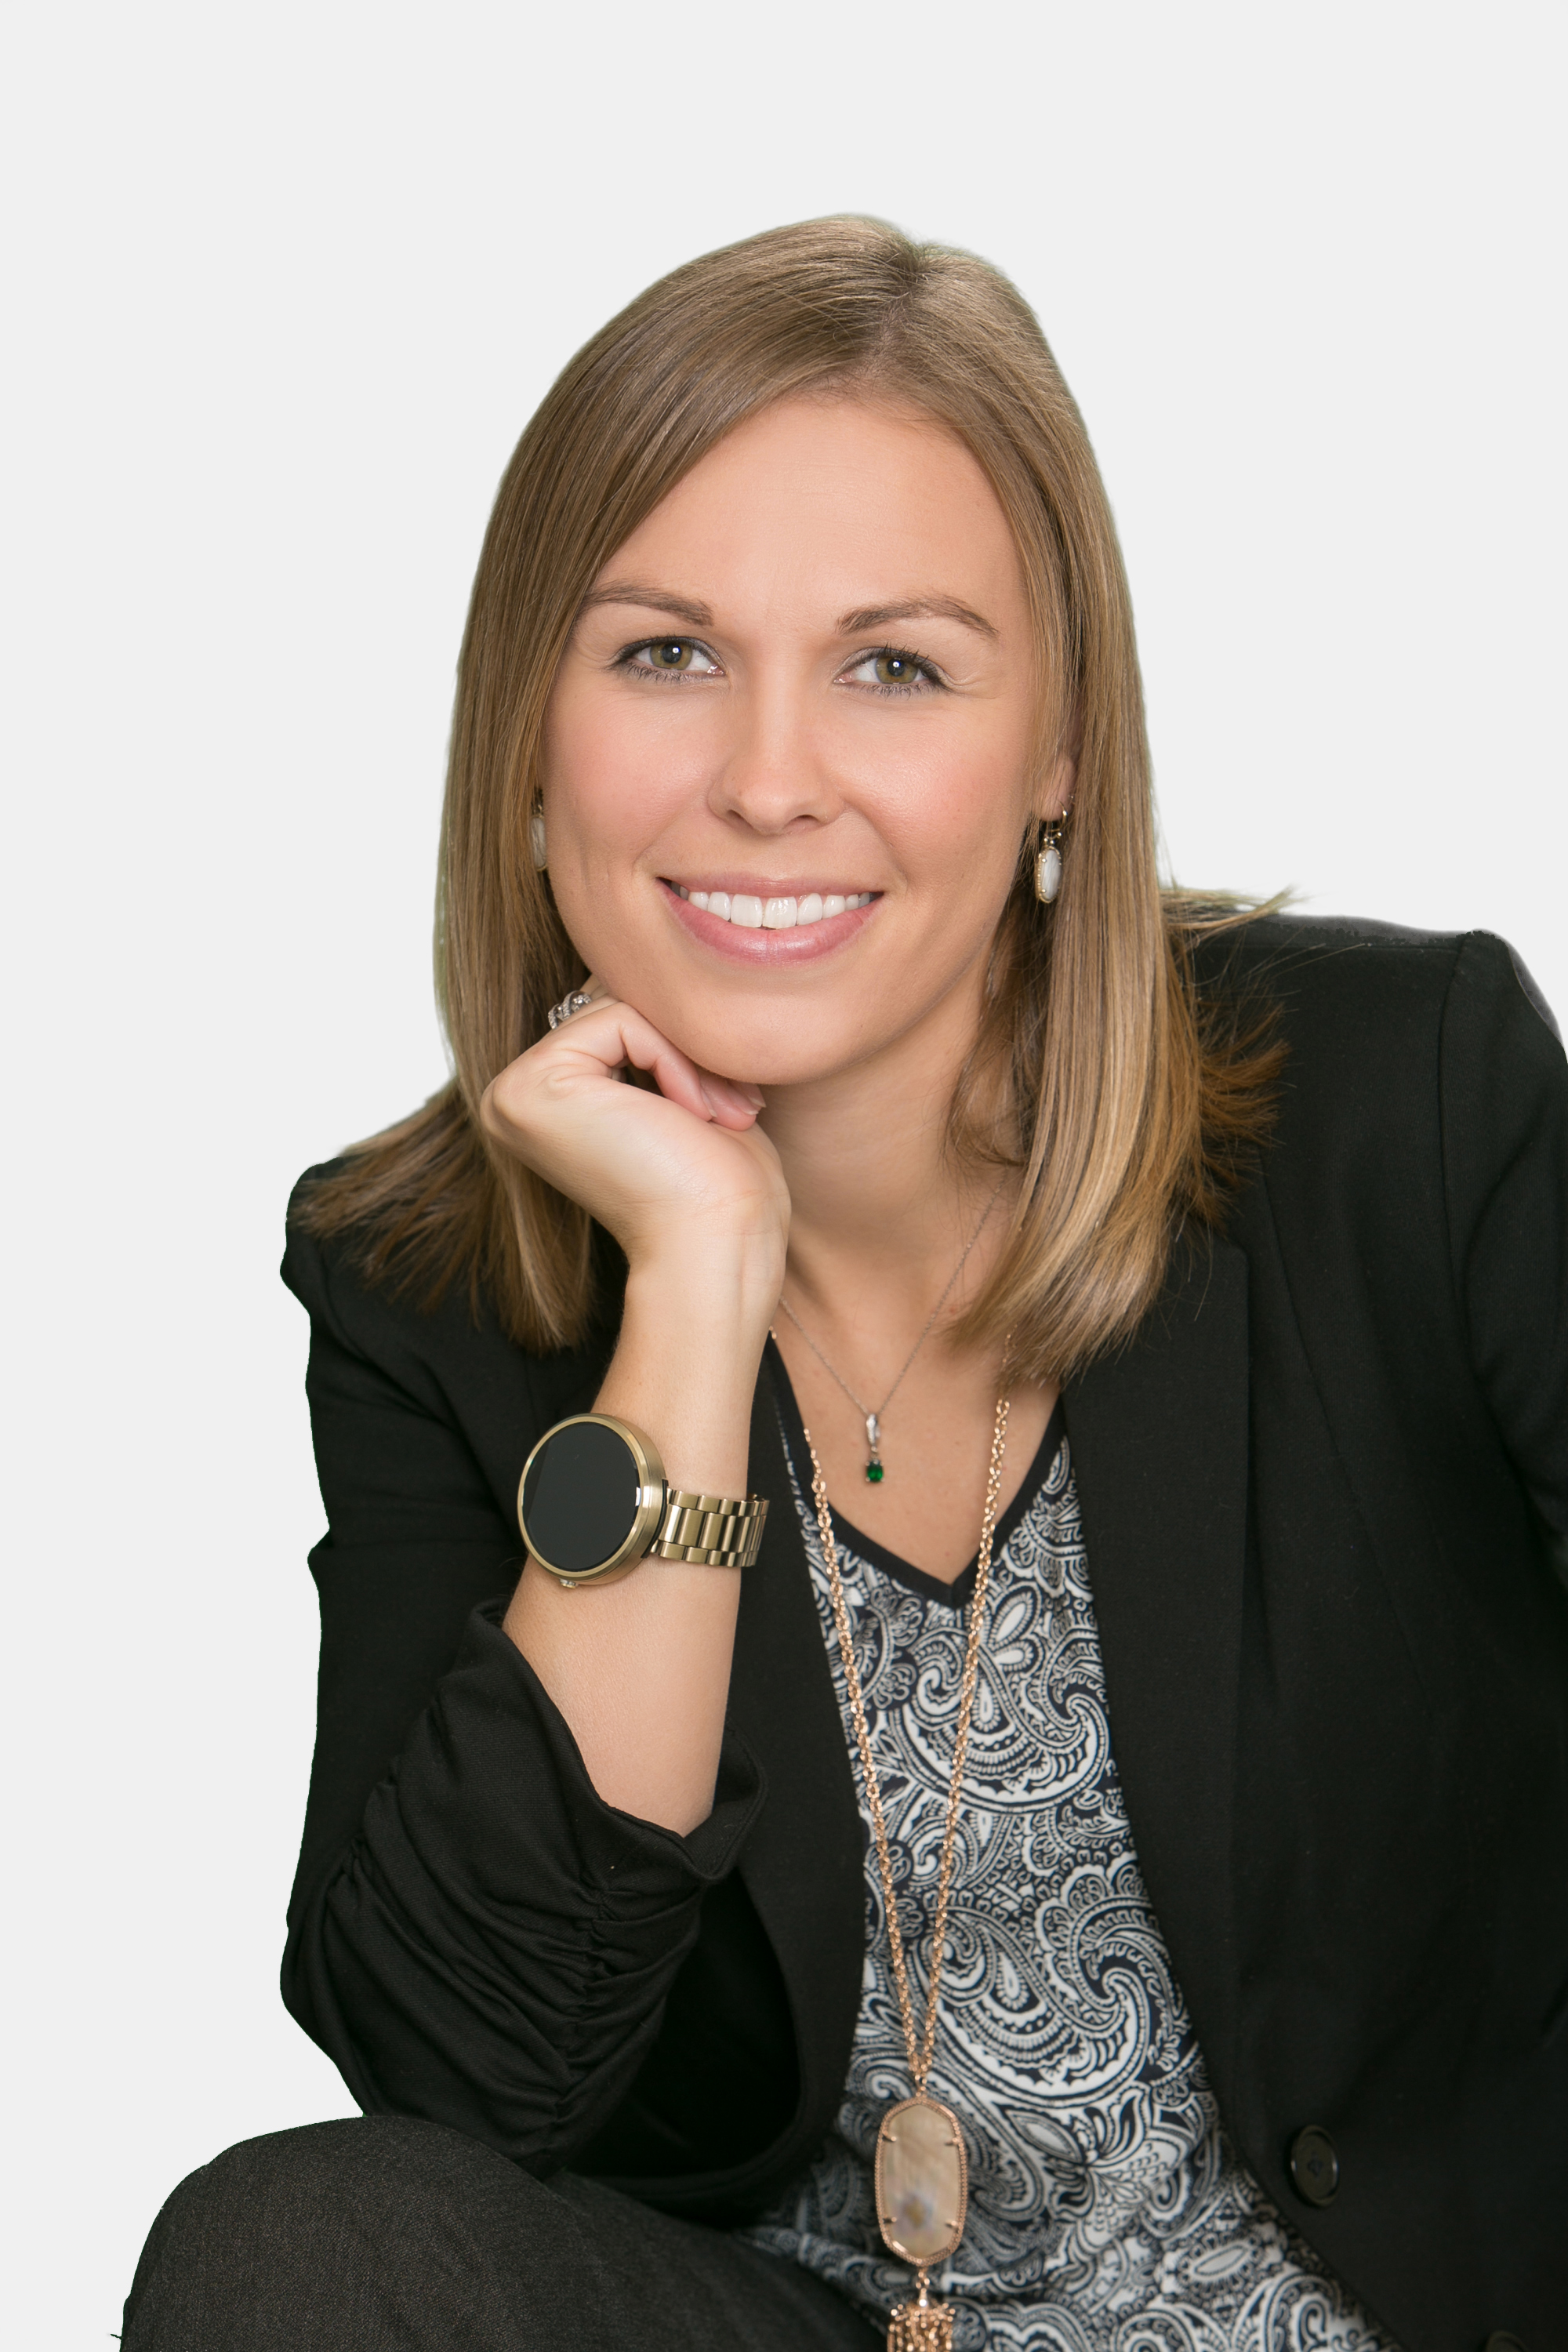 Sarah Robinson is a Sr. Manager, Customer Experience Operations in Austin, TX at LogicMonitor